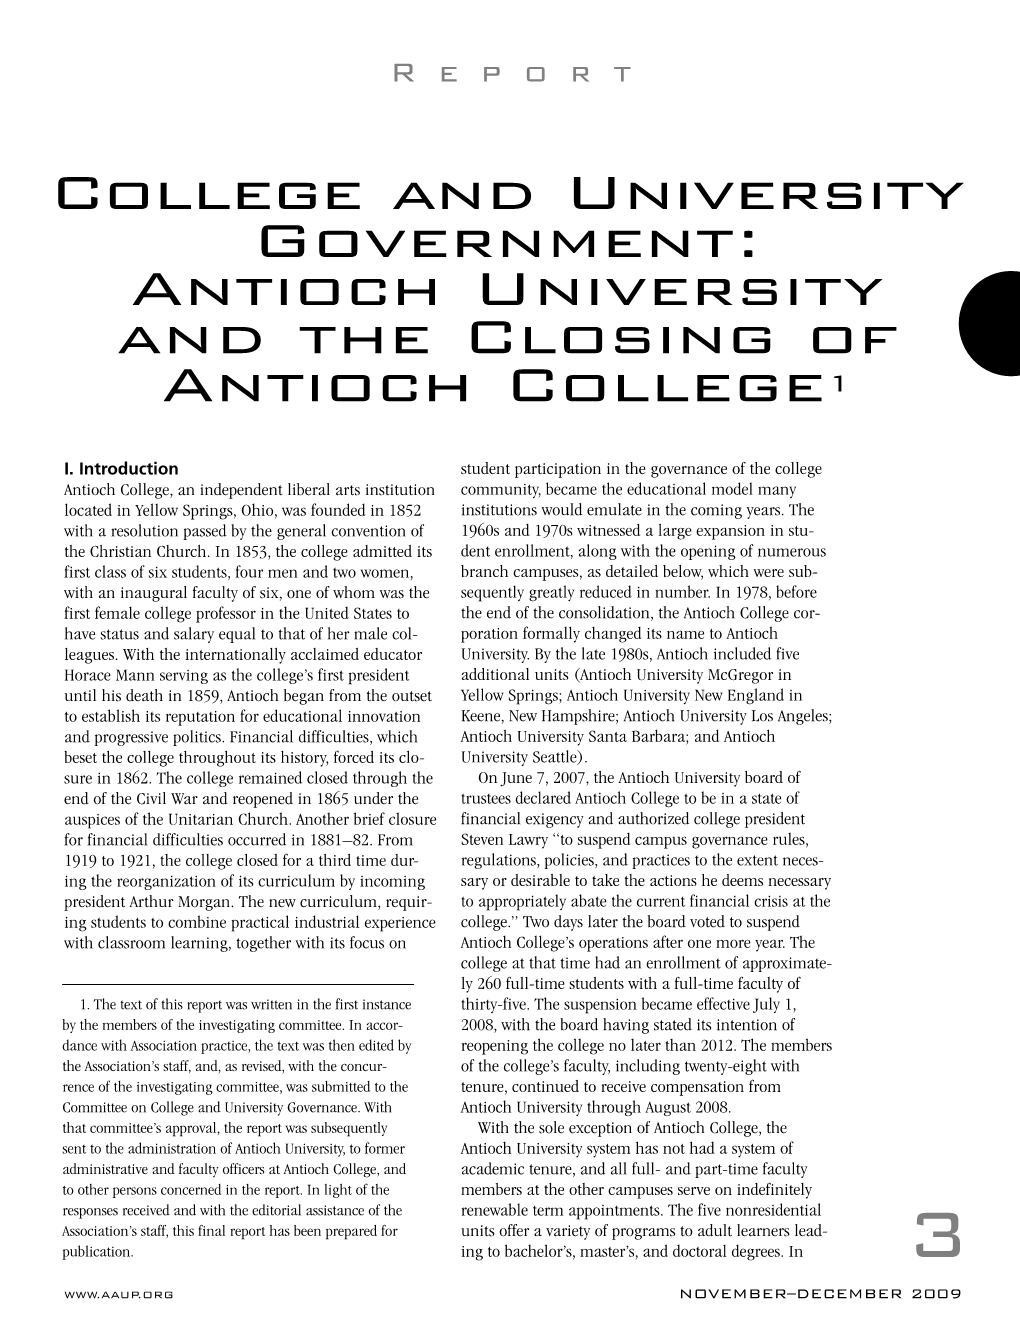 College and University Government: Antioch University and the Closing of Antioch College1